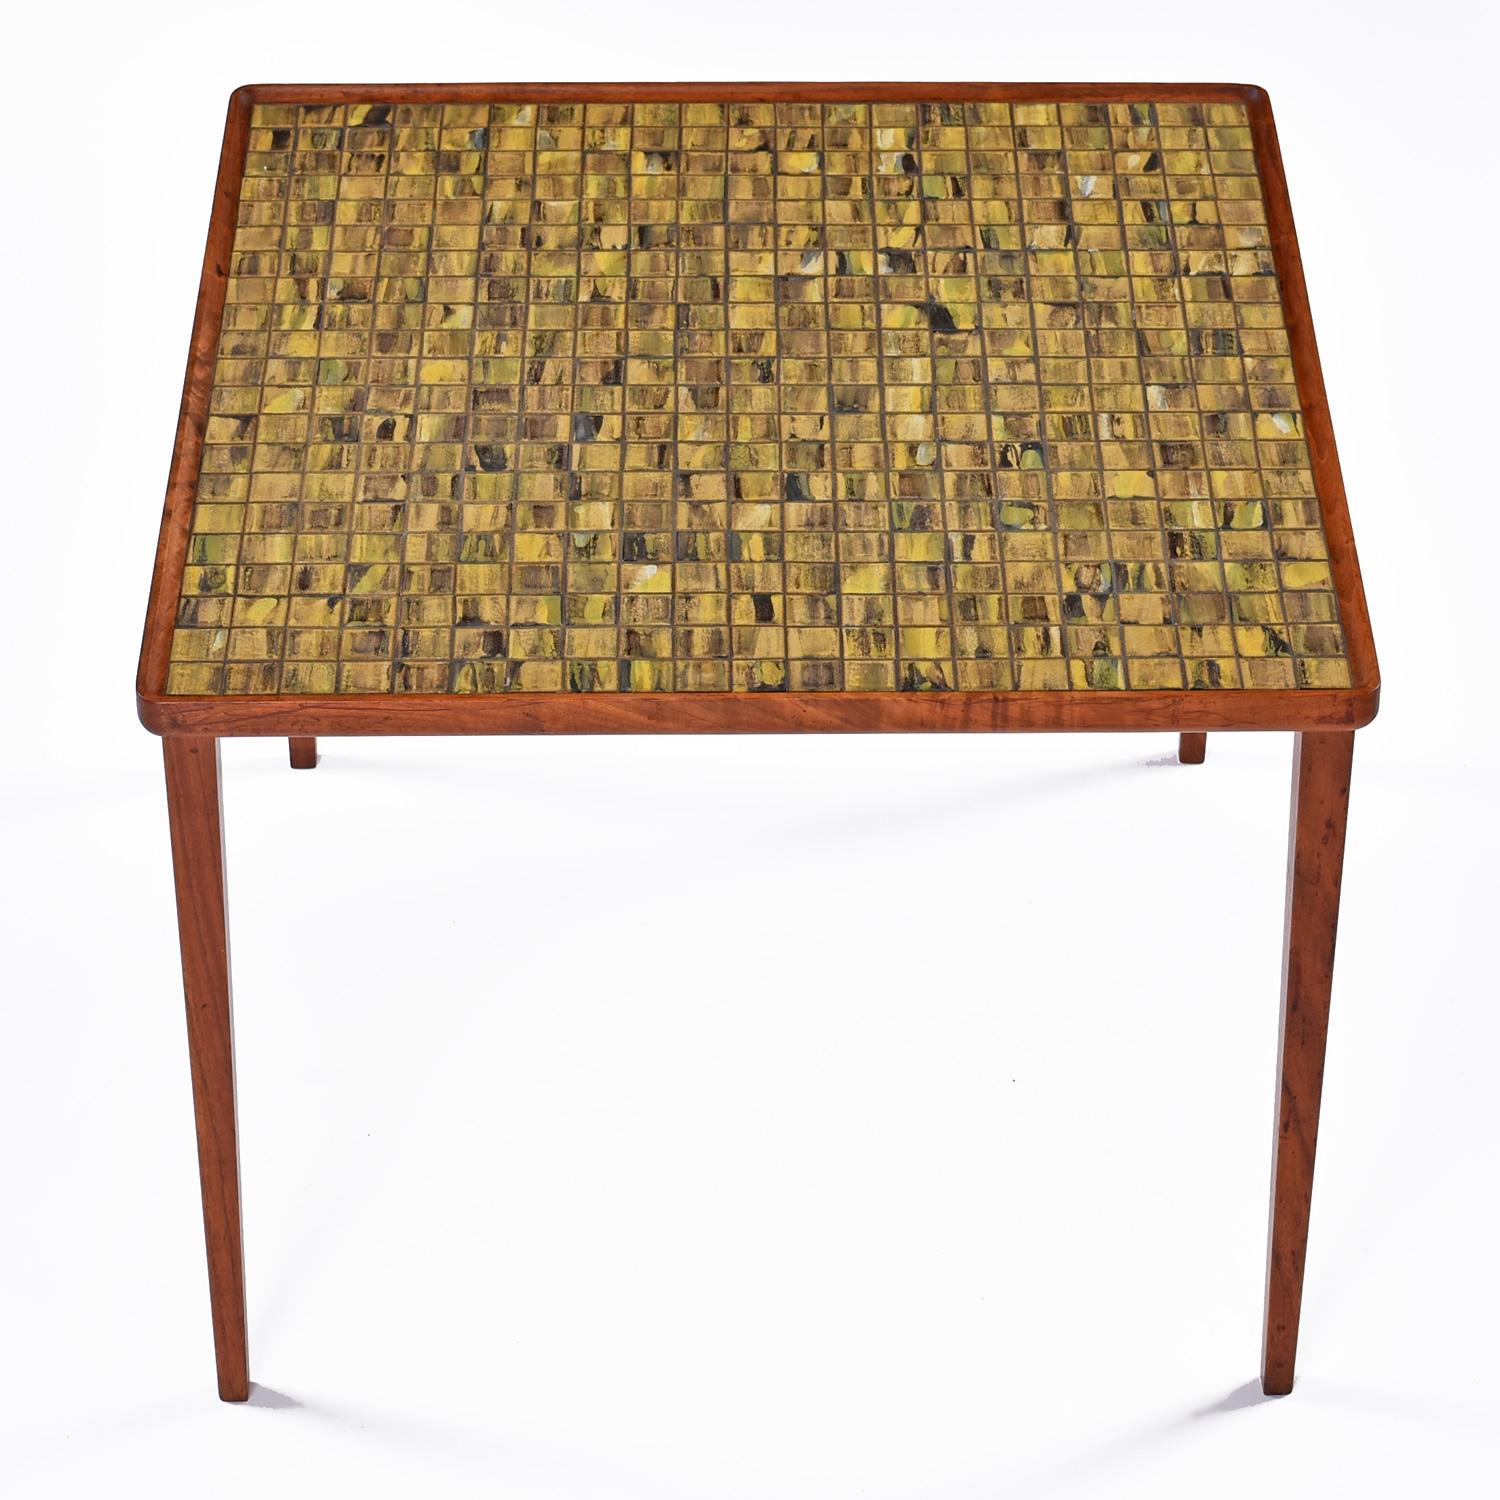 Raised Edge Danish Modern Teak Ceramic Mosaic Tile Cocktail Table  In Good Condition For Sale In Chattanooga, TN